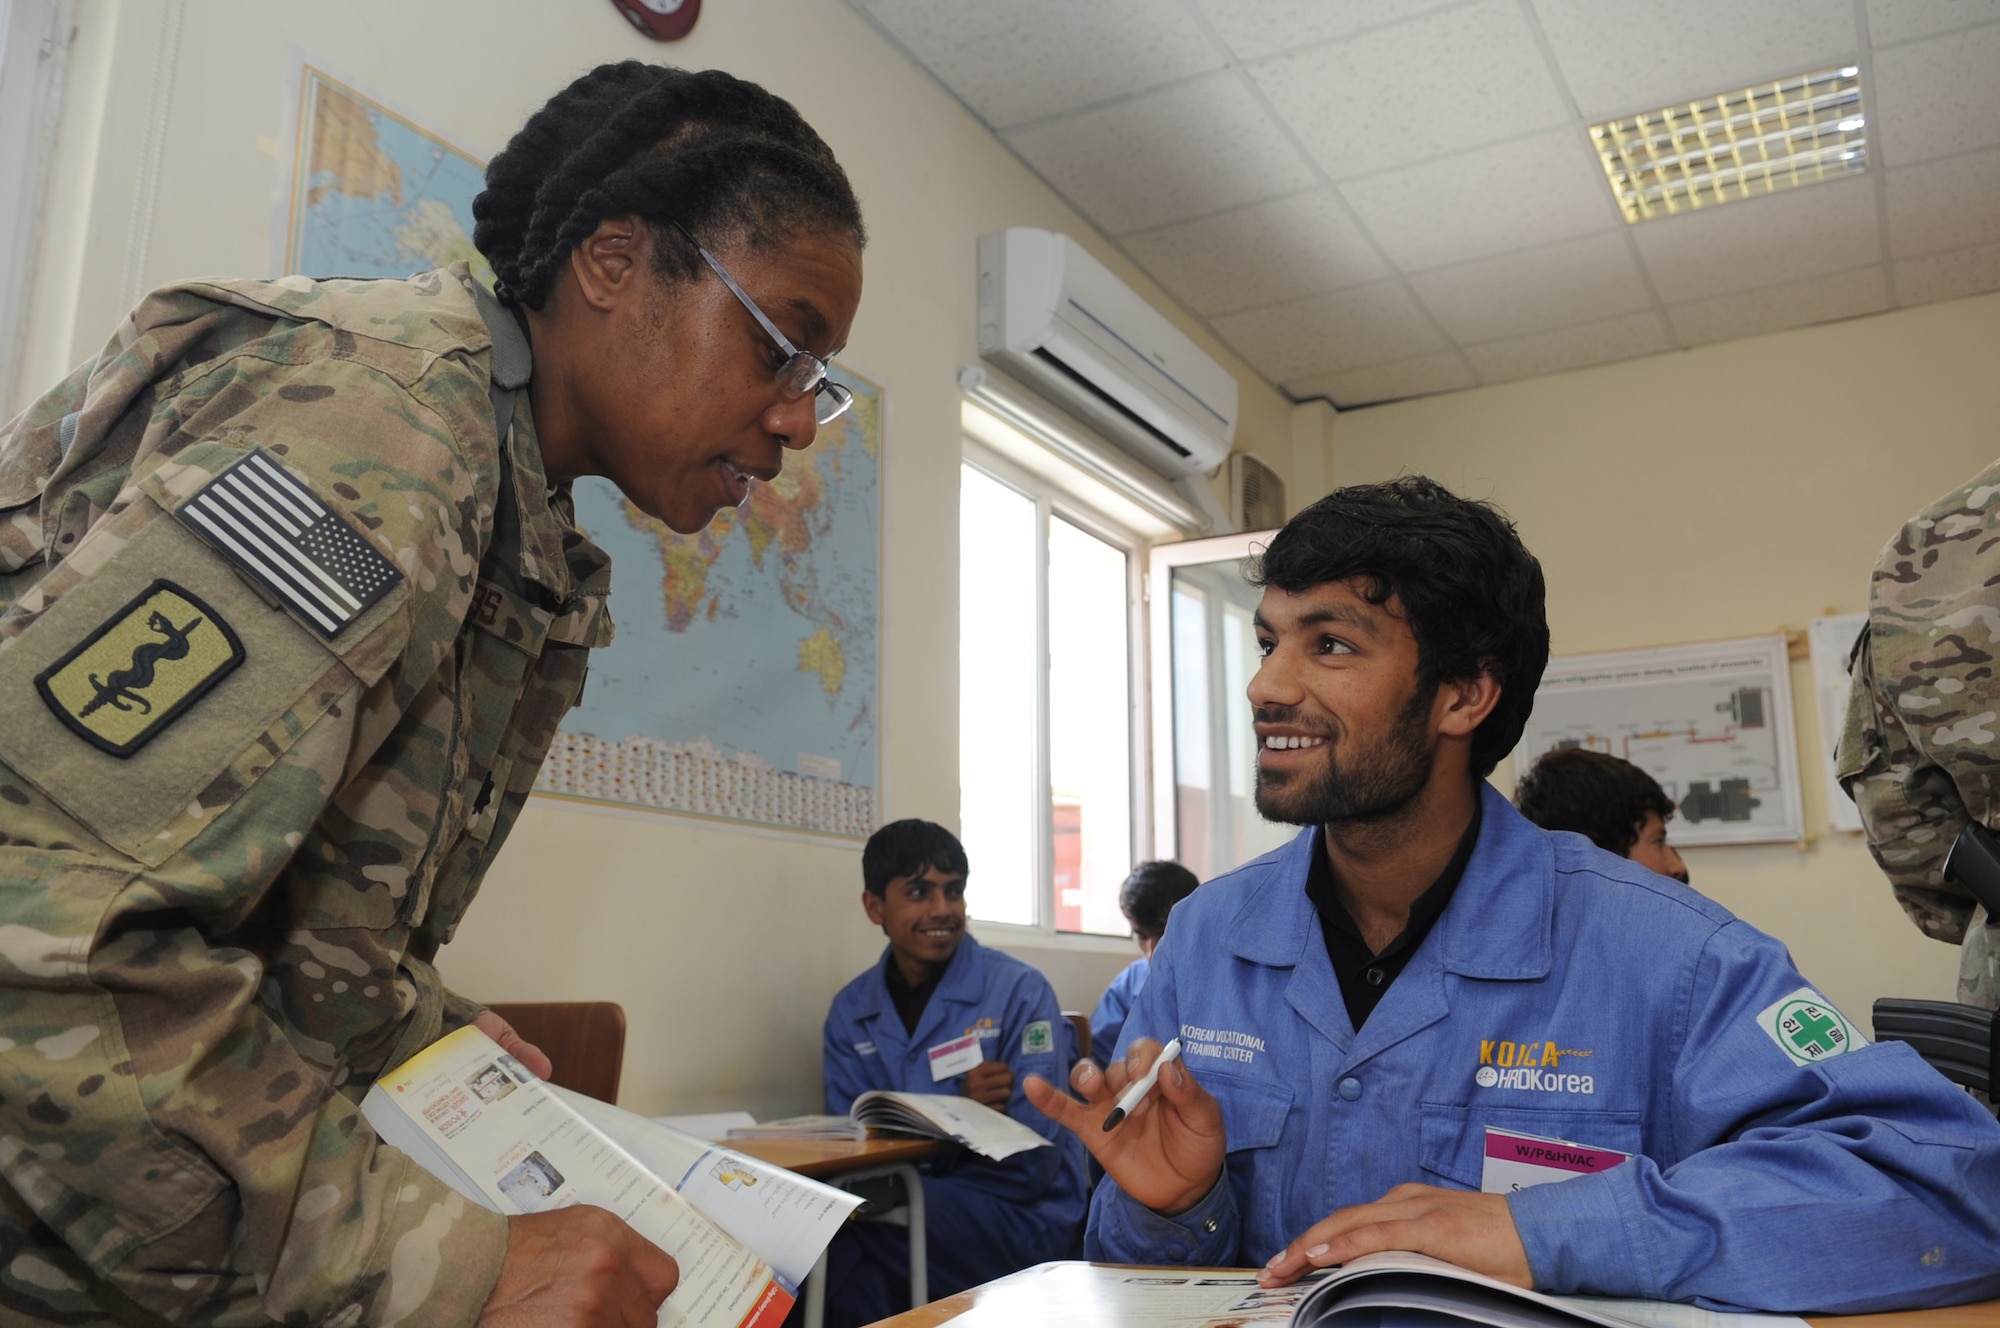 Lt. Col. Sheila Tibbs, 455th Expeditionary Medical Operations Squadron operating room officer in charge, speaks with a student at the Korean Vocational Training Center on Bagram Airfield, Afghanistan, April 10, 2013. Tibbs and her fellow Airmen are teaching conversational English to Afghan students here in addition to their lessons on skills like carpentry and plumbing at the KVTC. (U.S. Air Force photo/Staff Sgt. David Dobrydney)